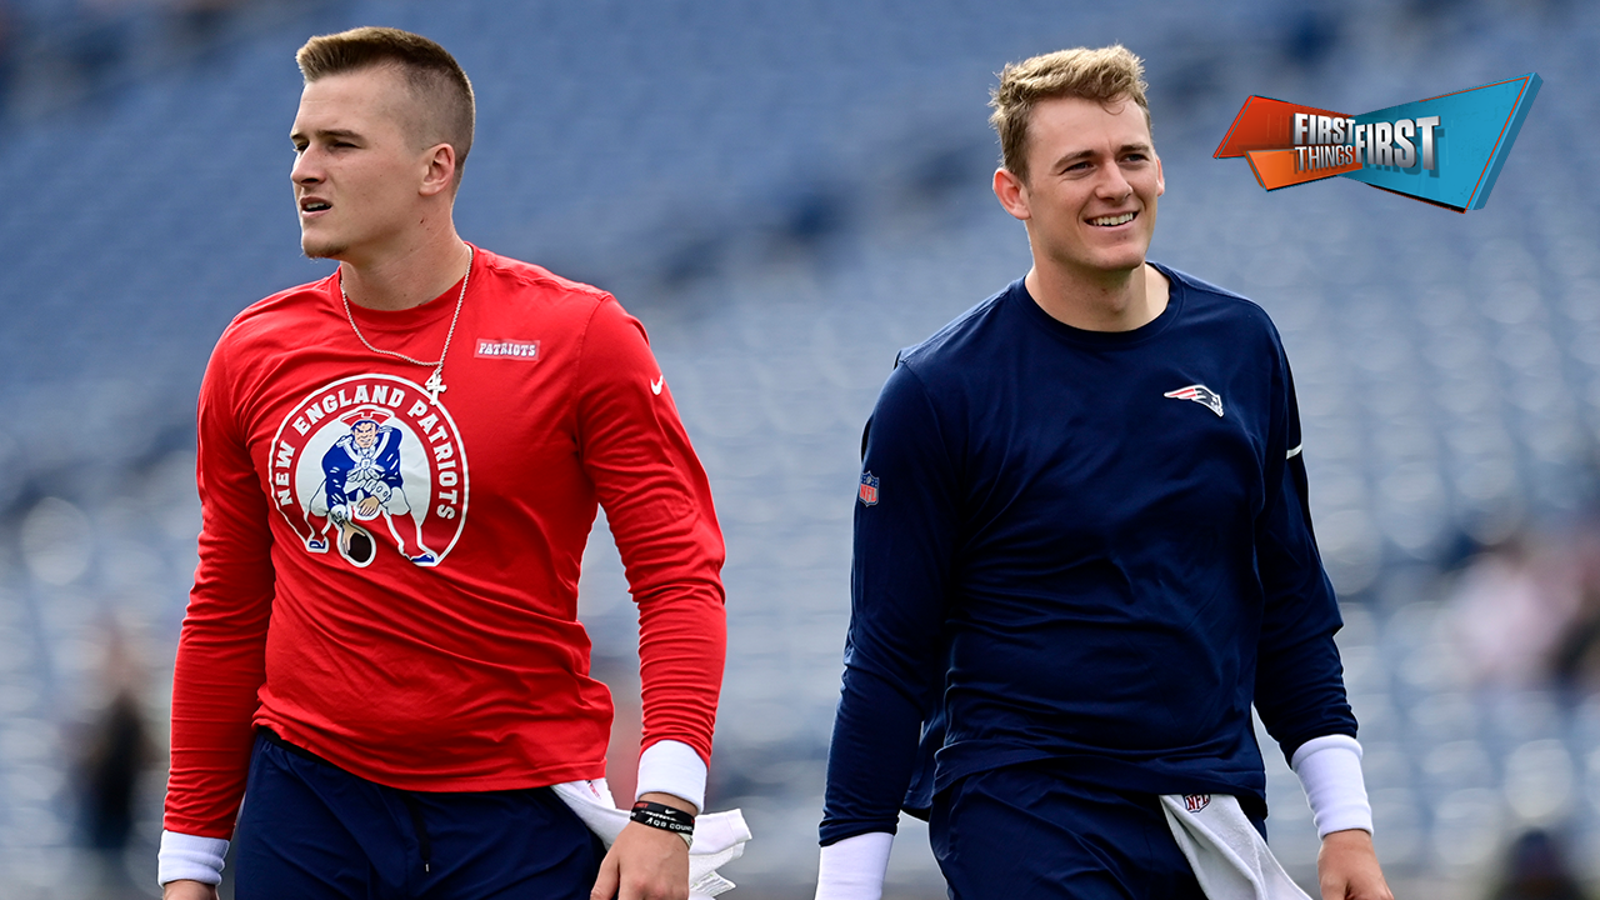 Bill Belichick on Patriots' QB1: "We'll give them a chance to compete"